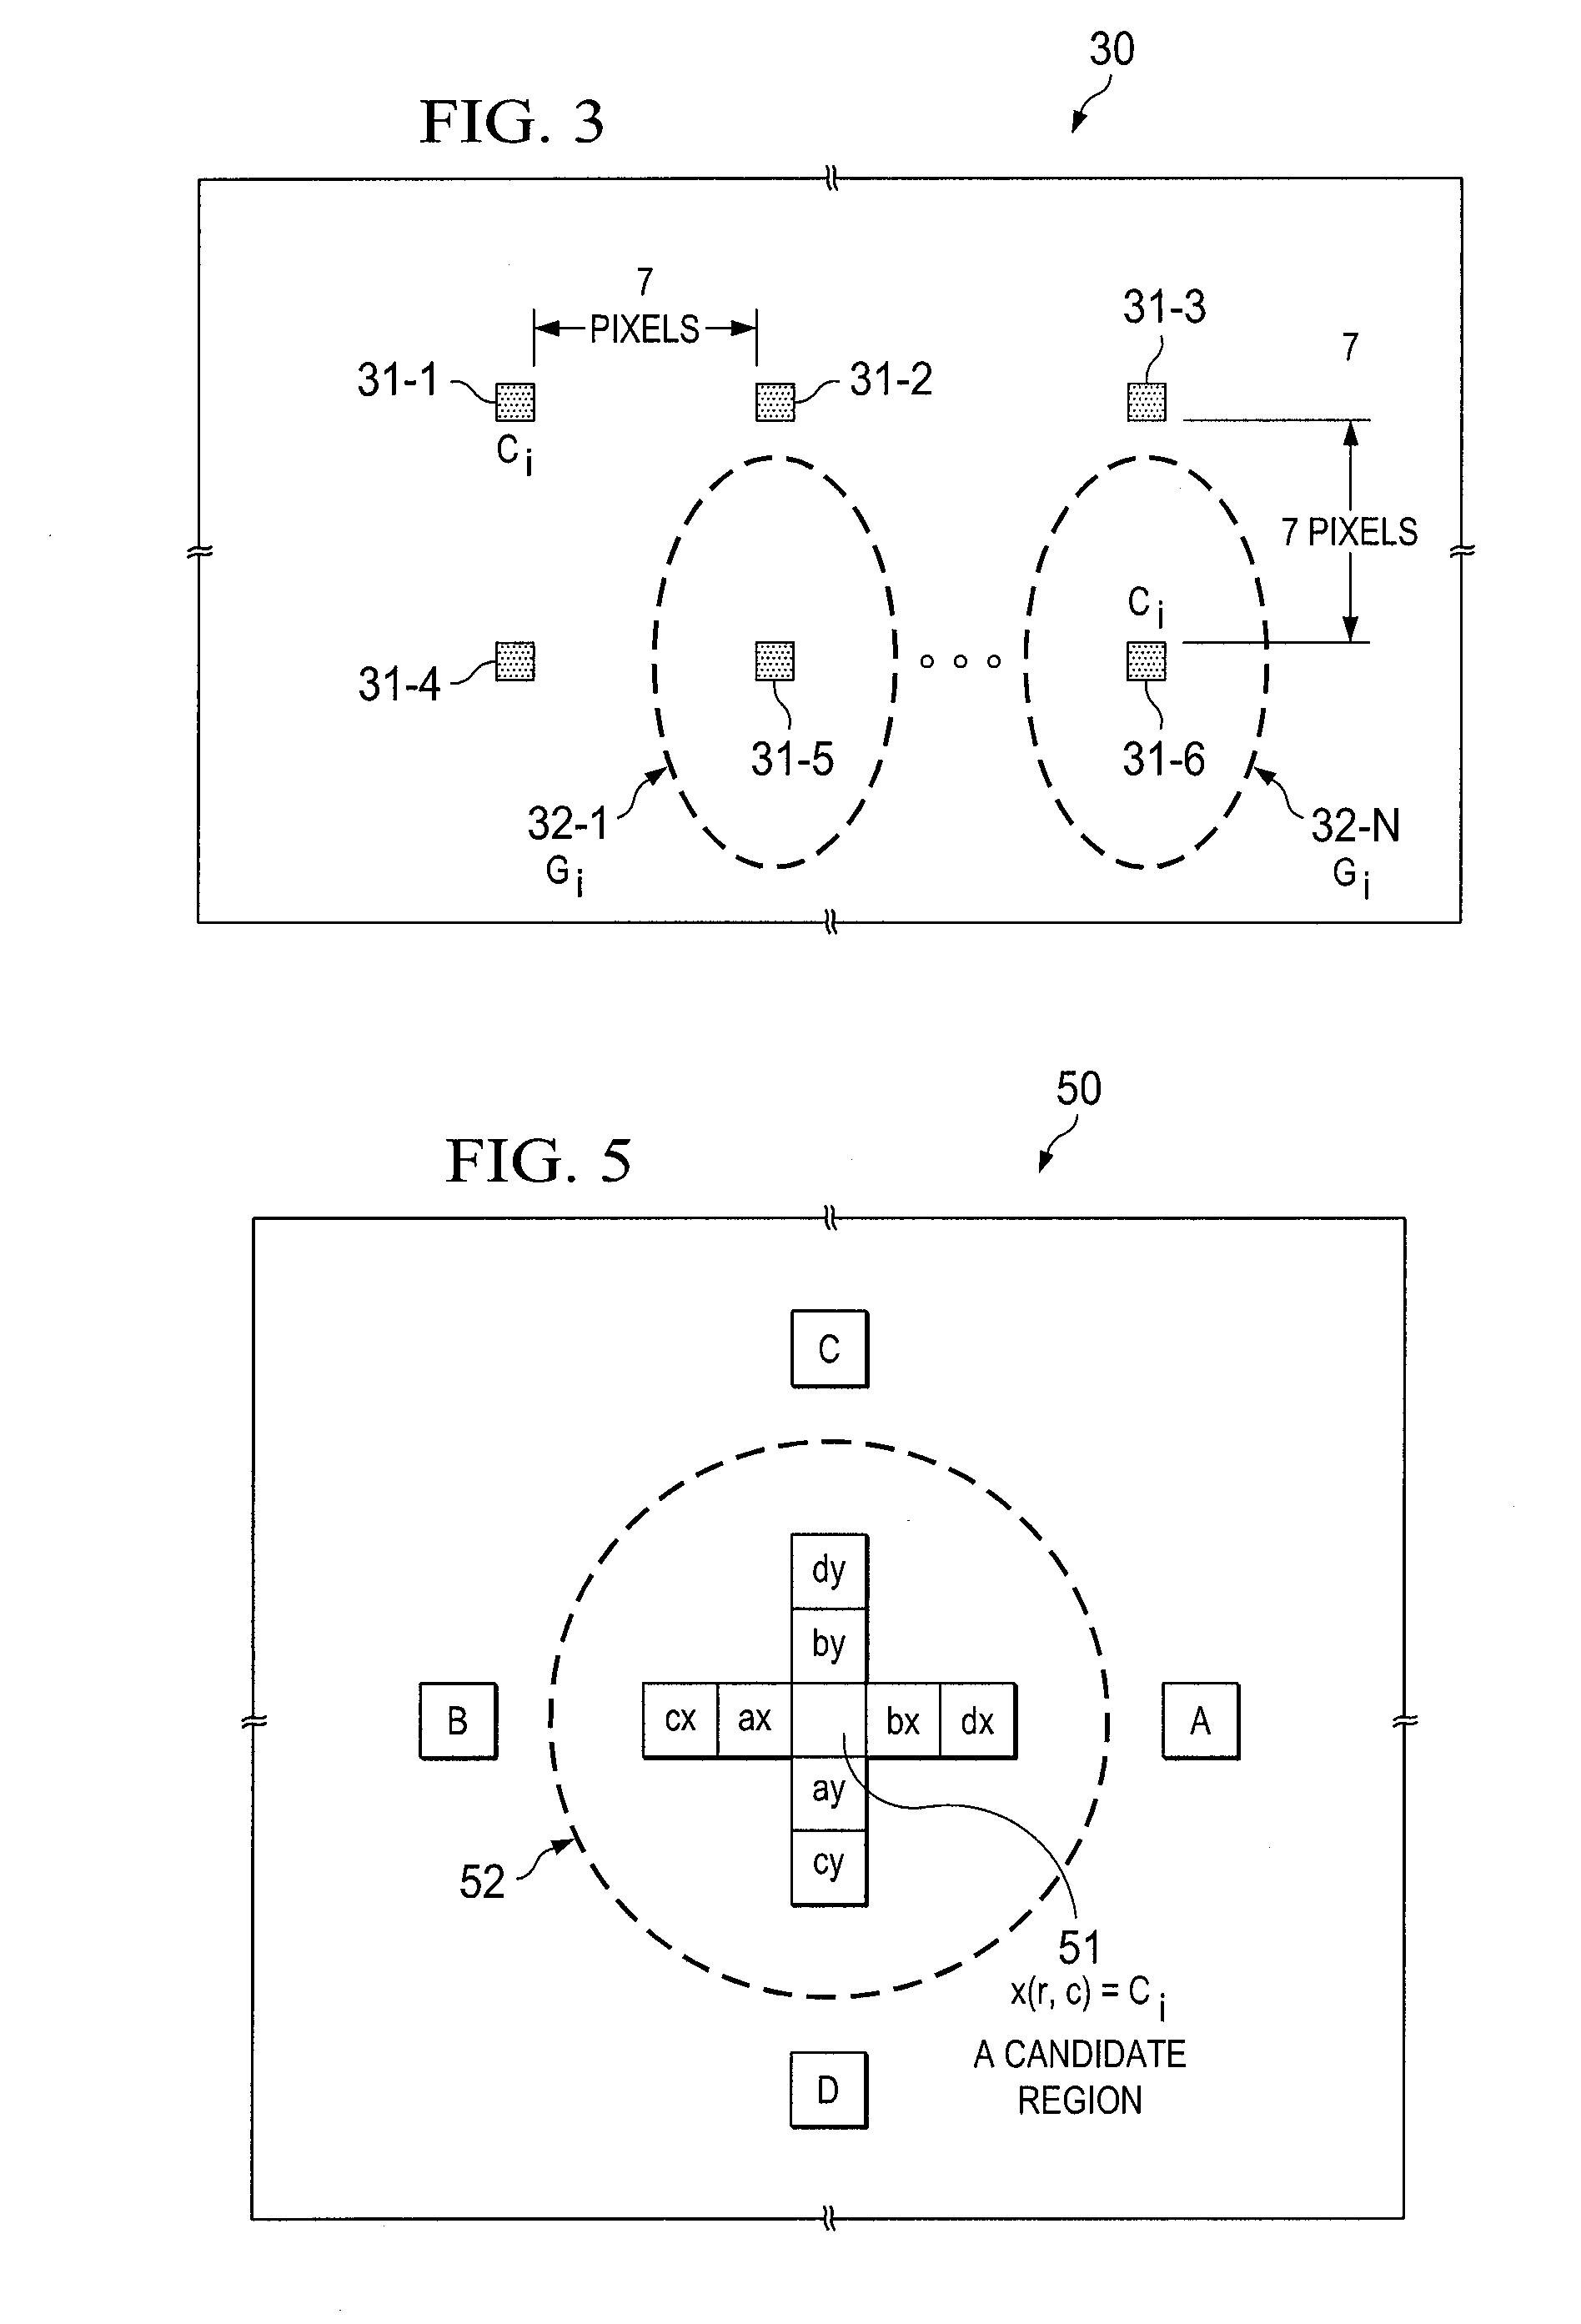 Systems and methods for improving the quality of compressed video signals by smoothing block artifacts